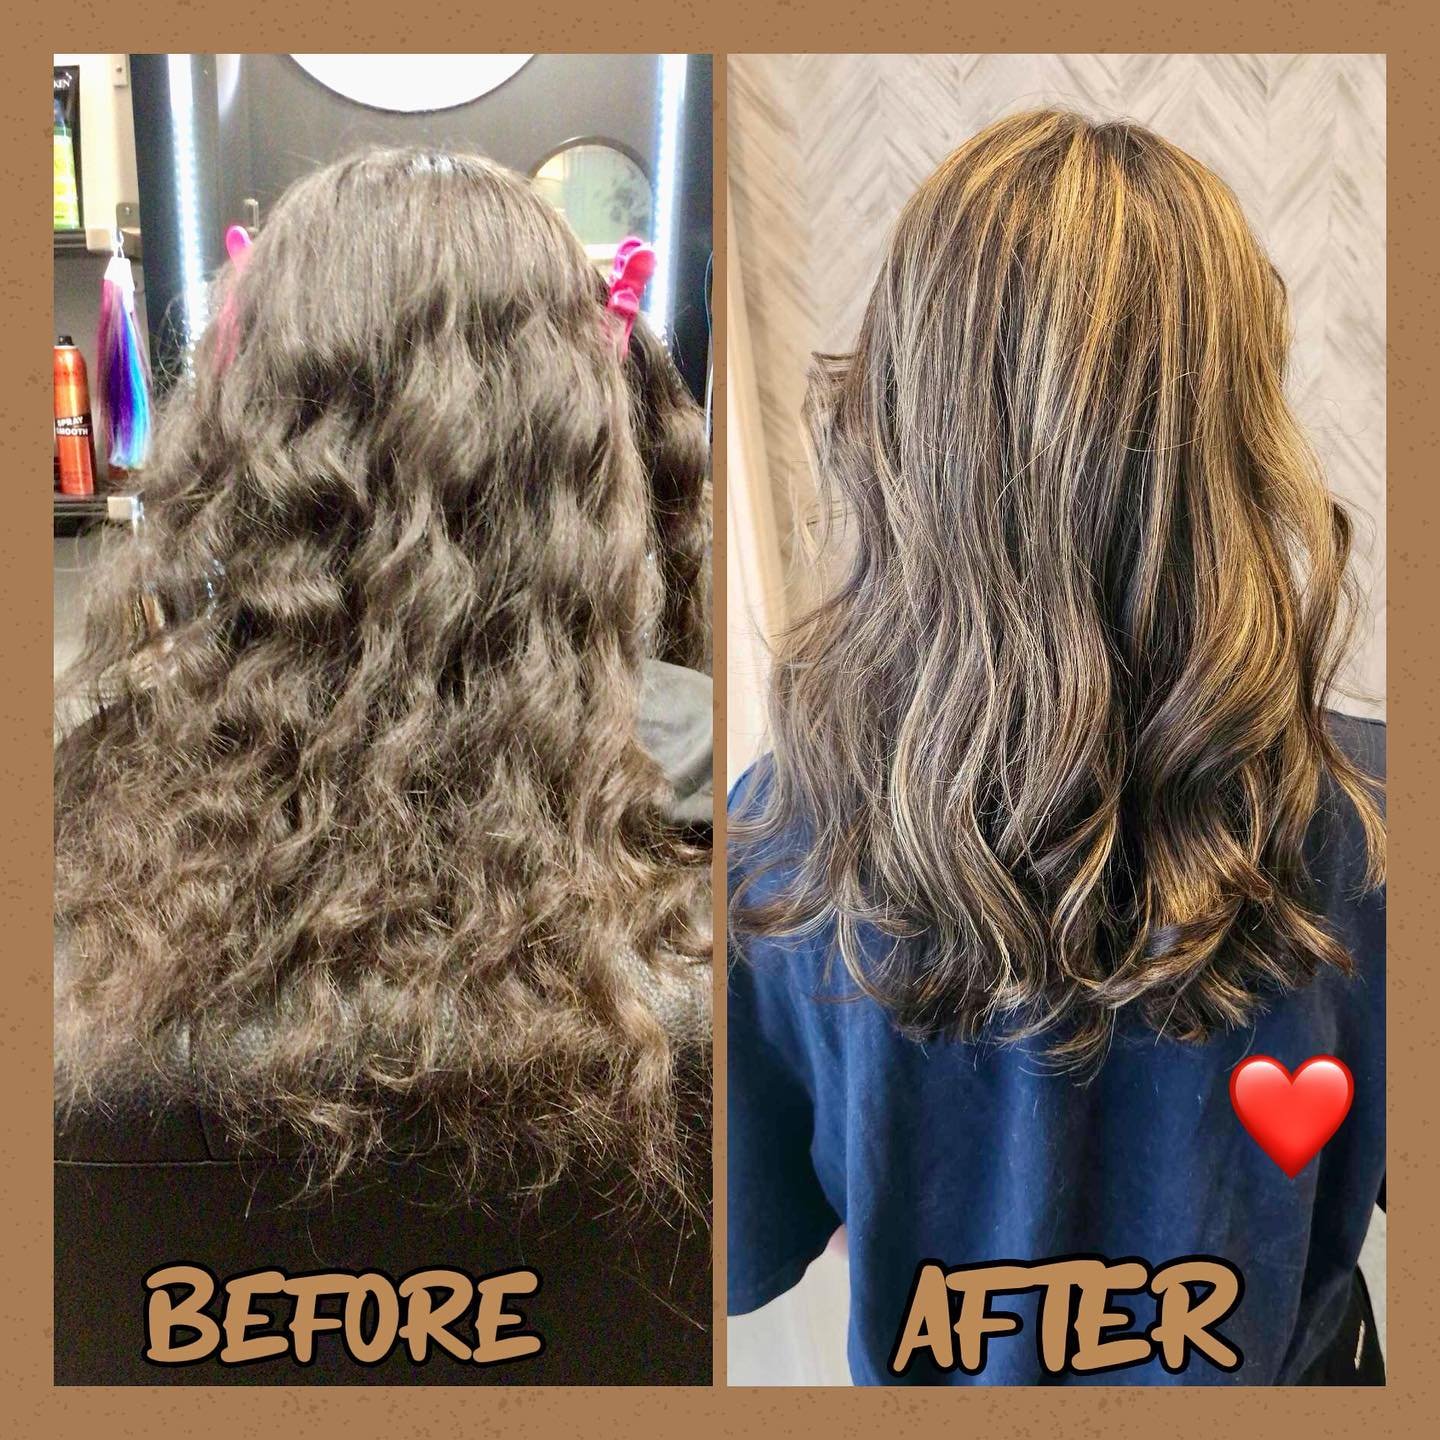 🎉Michelle&rsquo;s new client Penelope has NEVER had her hair colored before. After a thorough consultation they chose a balayage highlight with a natural gloss.  And to finish a long layered haircut with soft curls. We think she looks AMAZING!!! ❤️ 